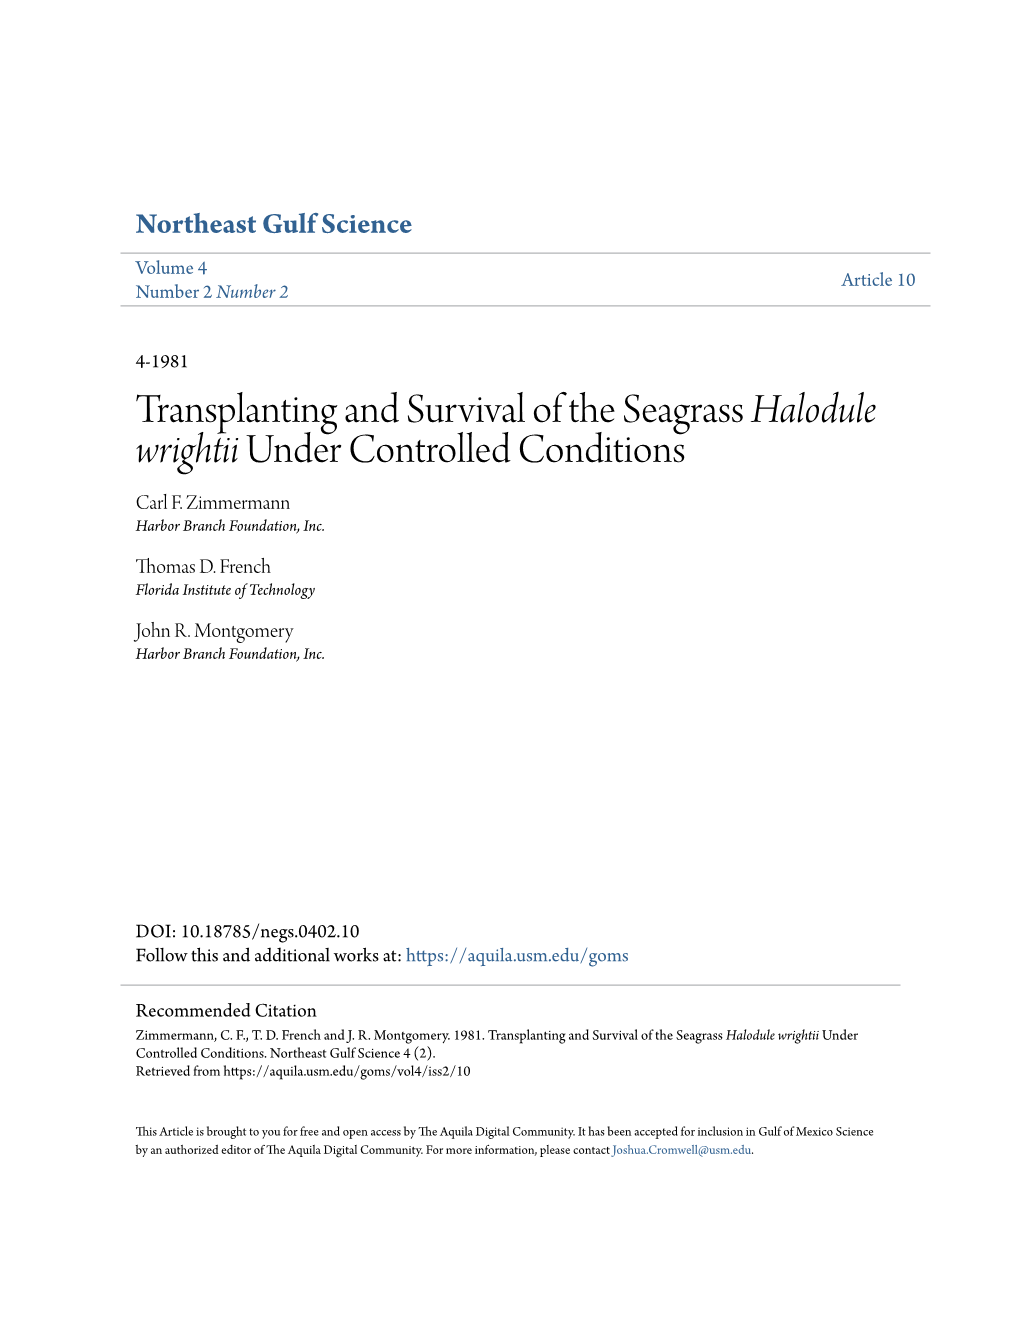 Transplanting and Survival of the Seagrass Halodule Wrightii Under Controlled Conditions Carl F